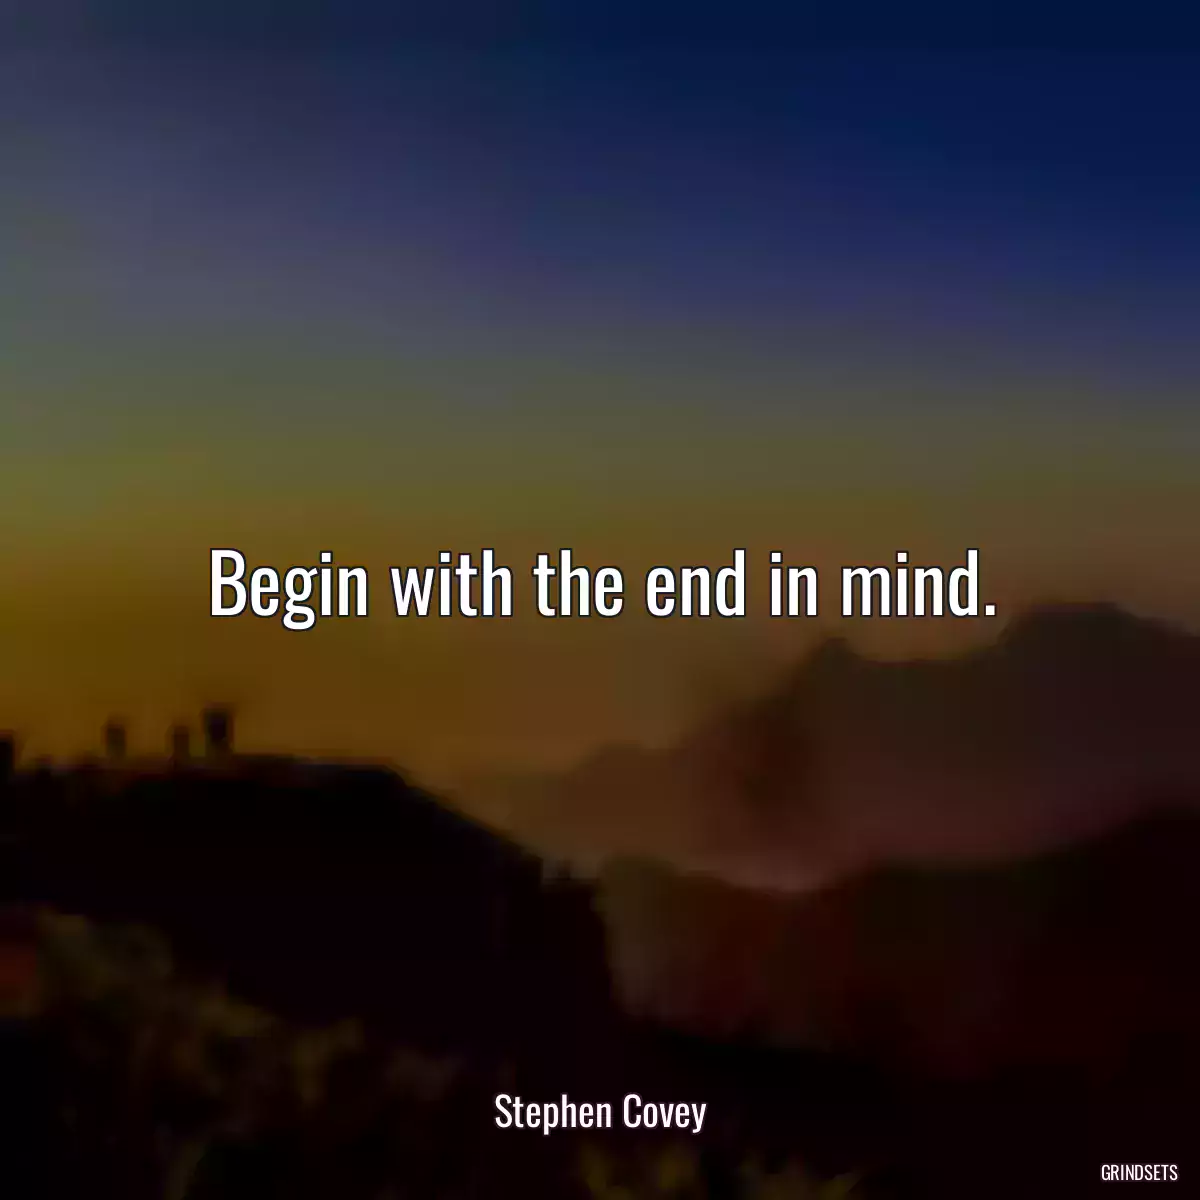 Begin with the end in mind.